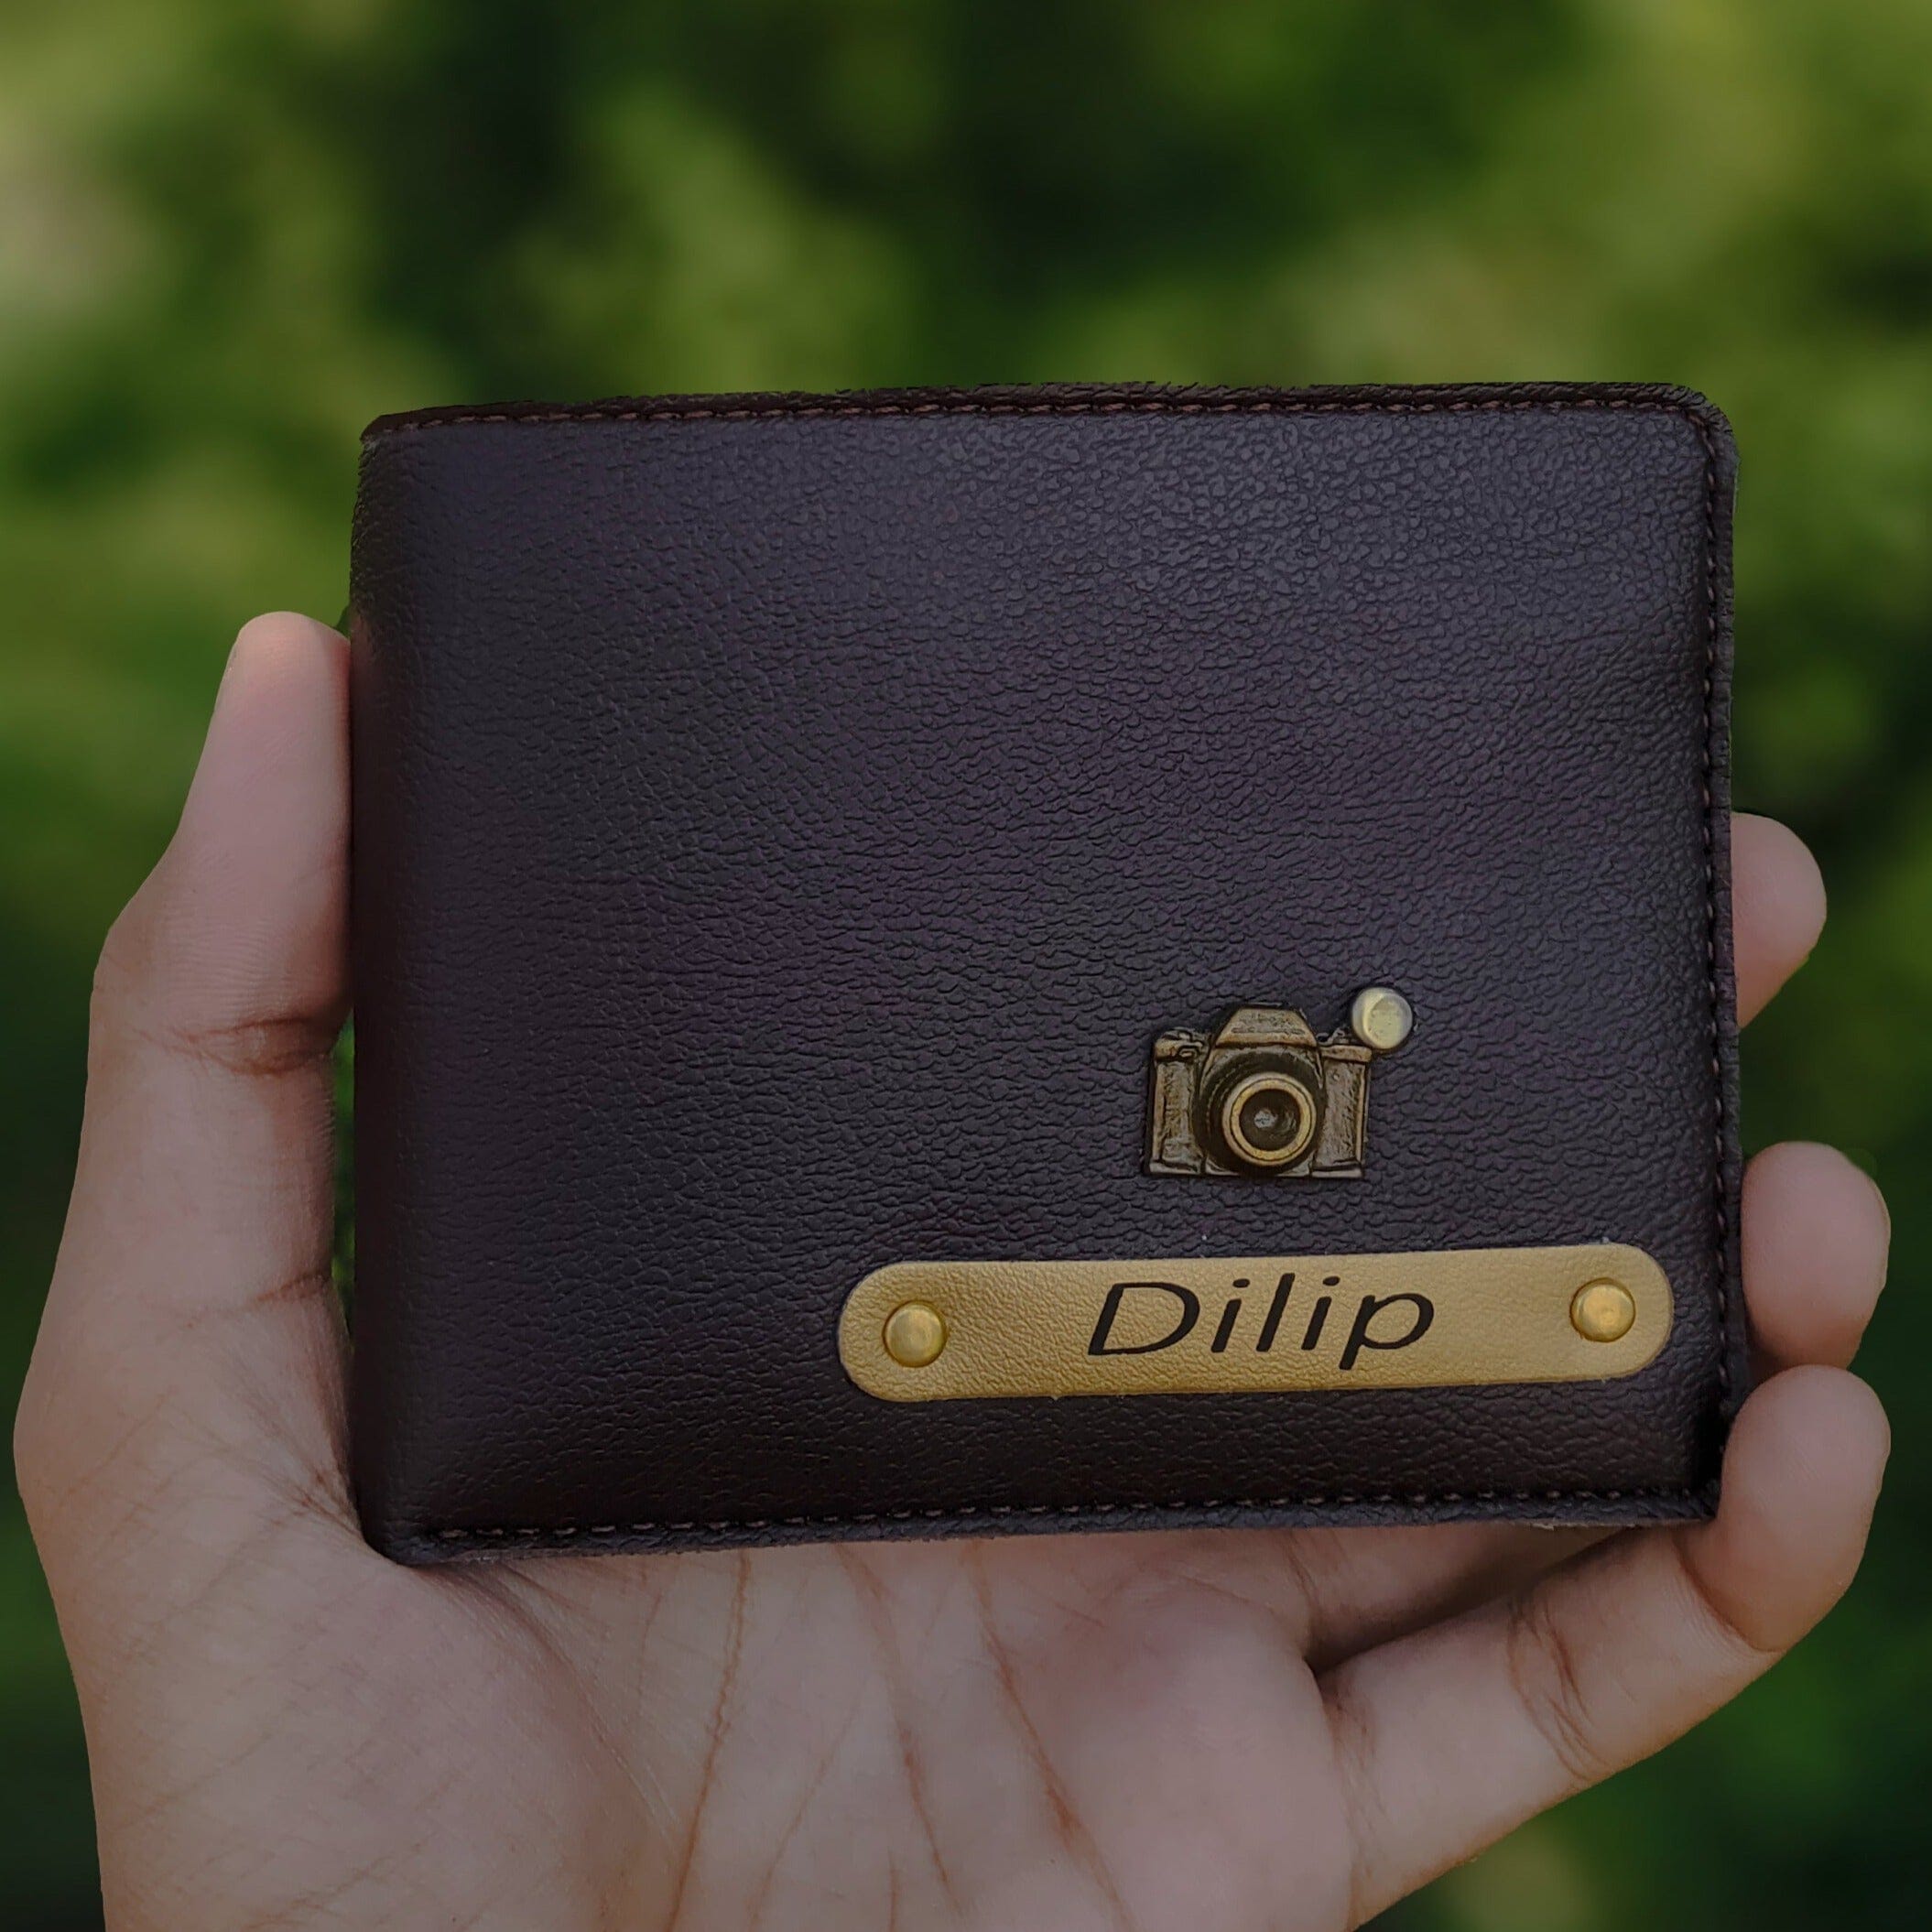 Premium Customizable Men’s Leather Wallet - Personalized, Stylish and Durable | Mellowprints